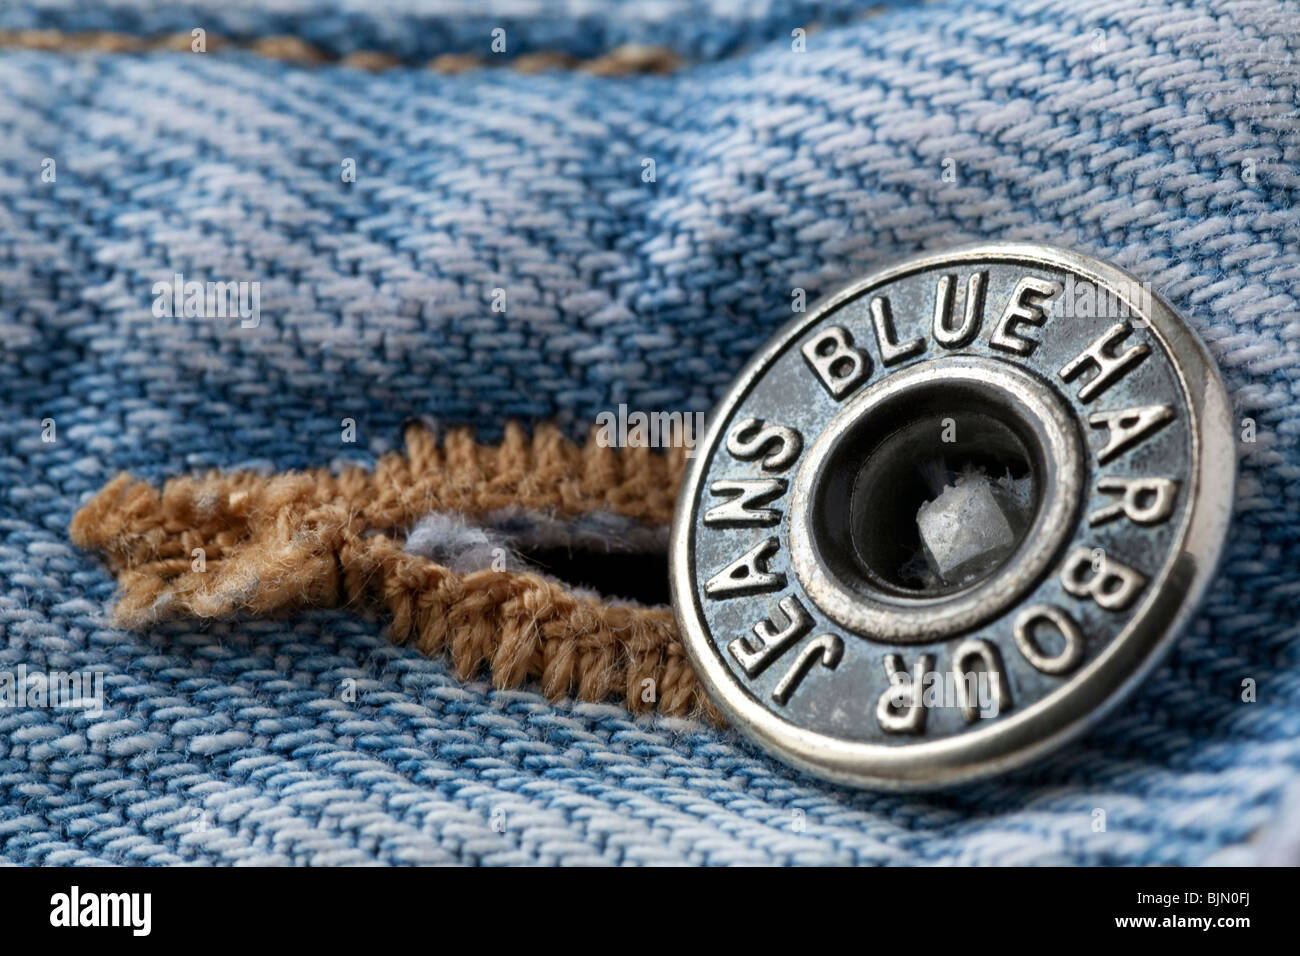 Close up image of the metal waist band fastening on a pair of faded blue denim jeans showing the makers brand name Stock Photo